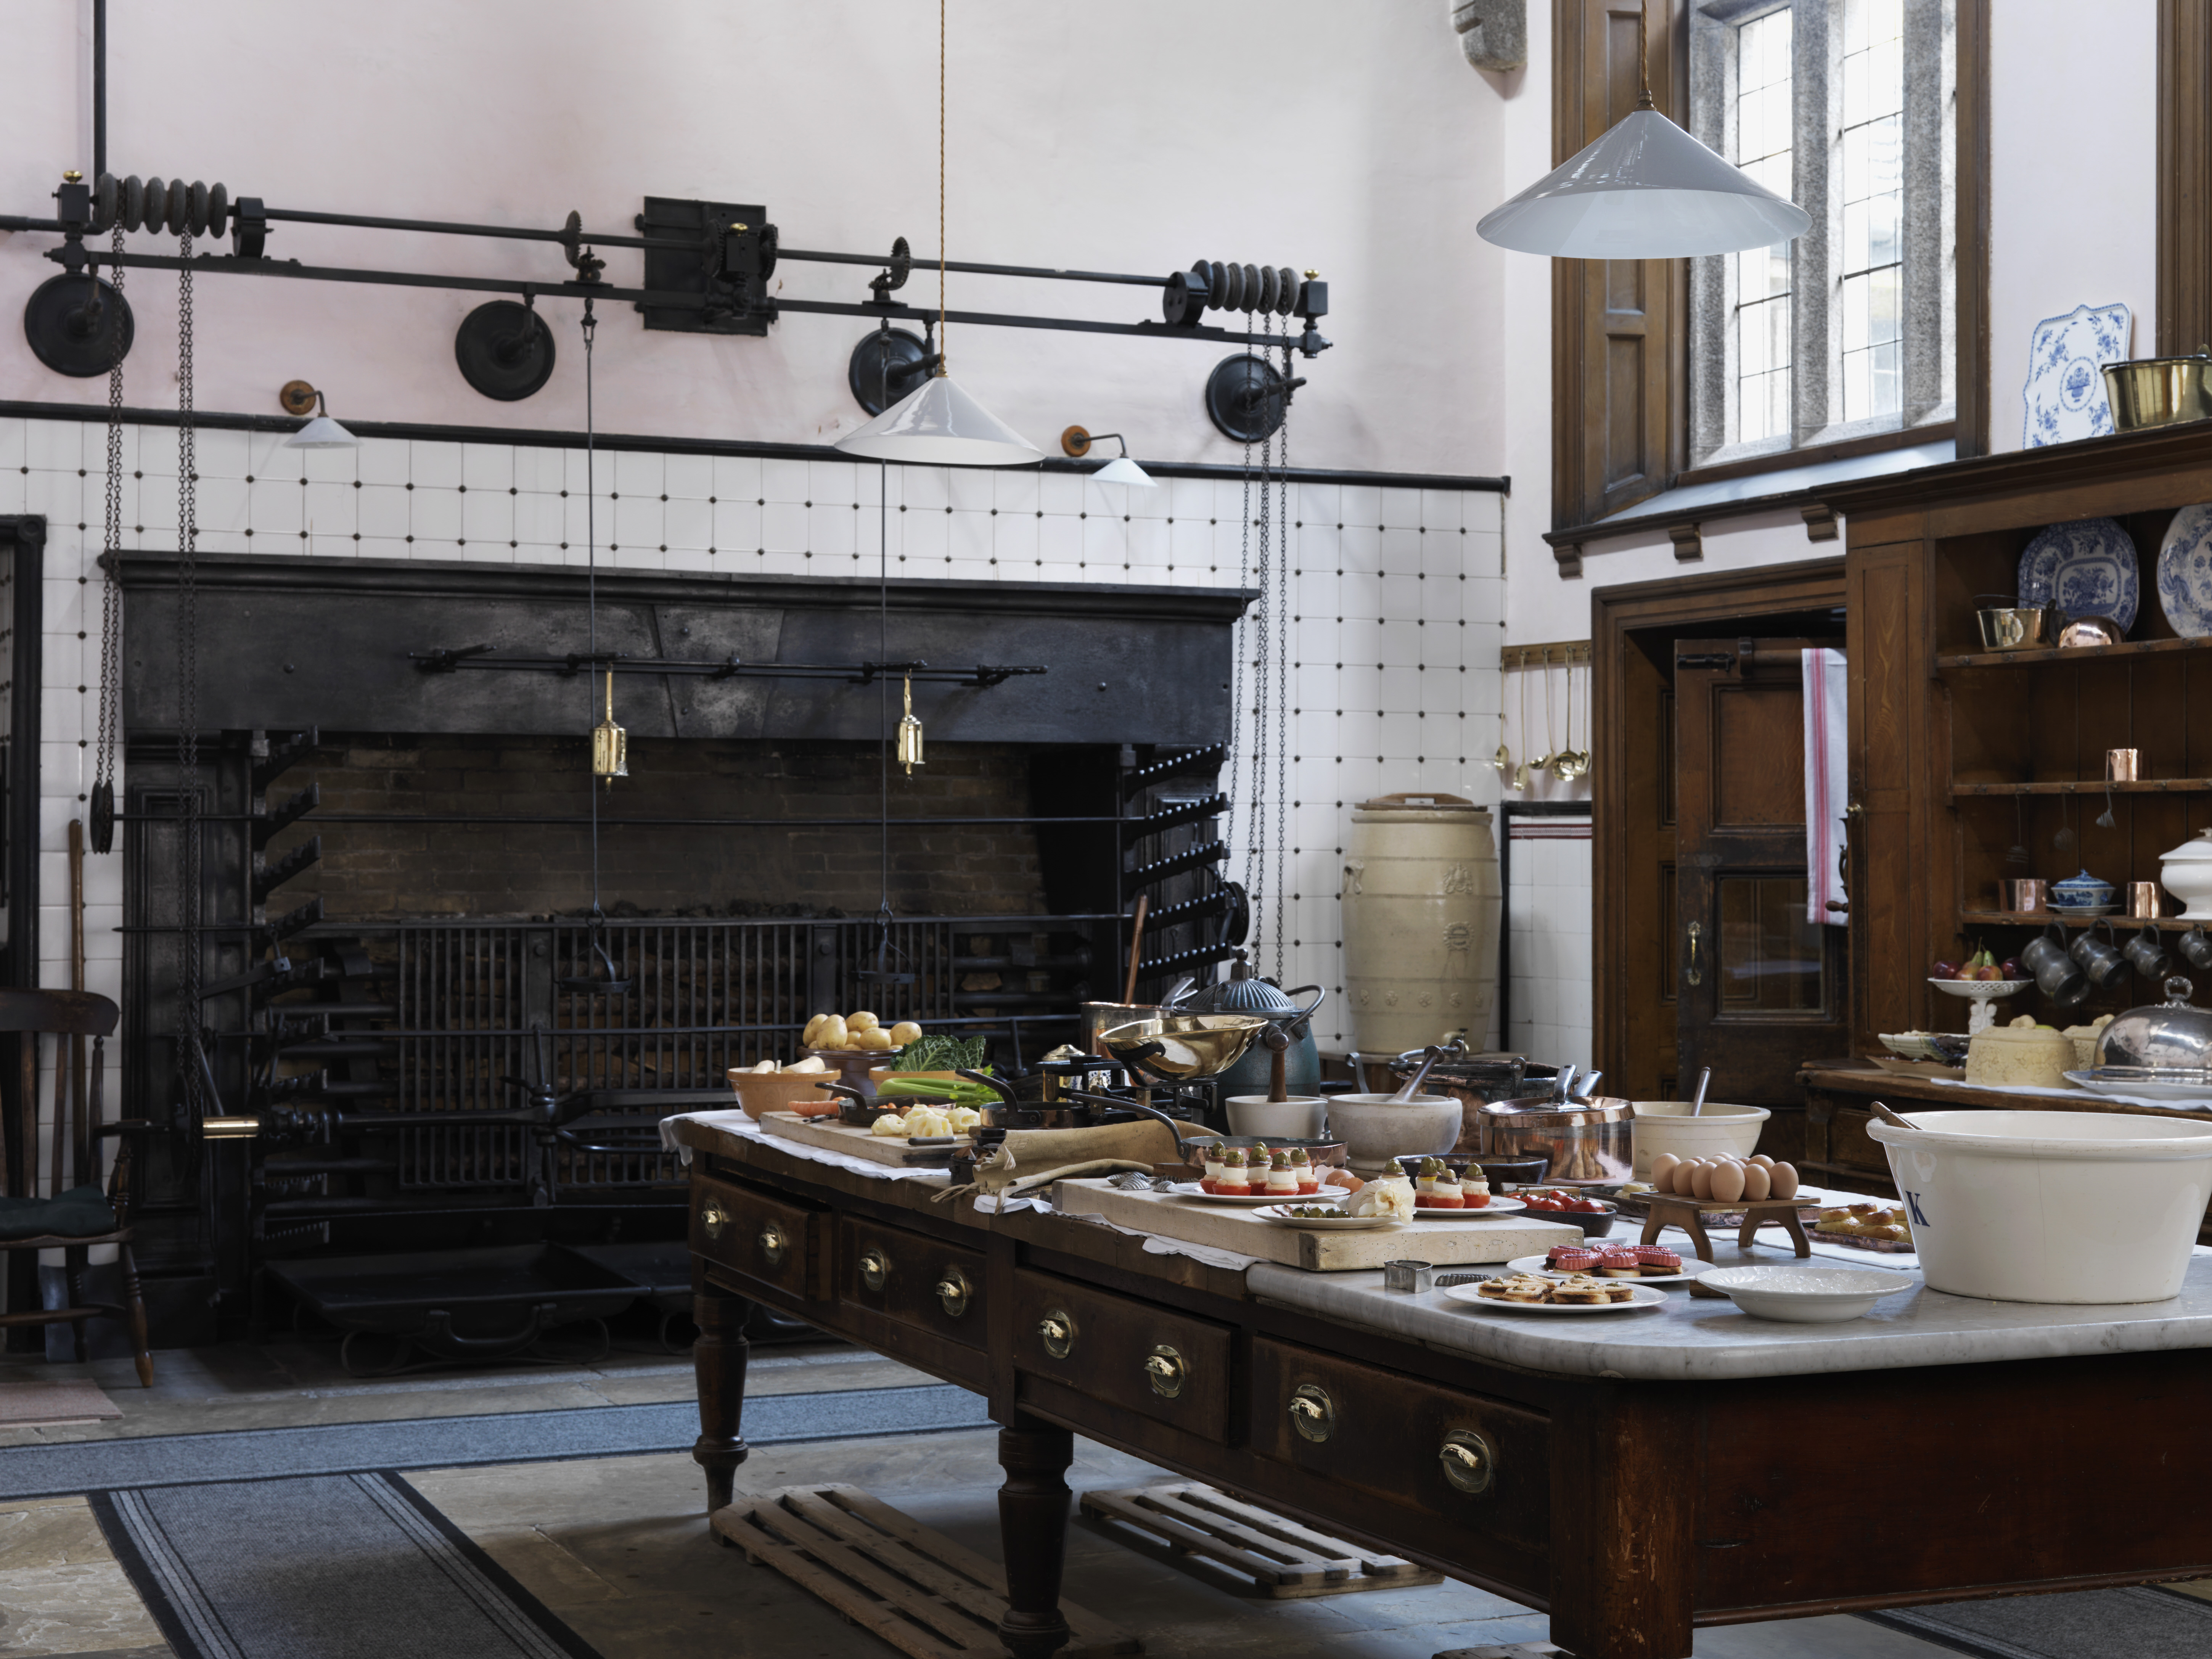 The Kitchen looking towards the roasting spits and fire at Lanhydrock, Cornwall ©National Trust Images Andreas von Einsiedel